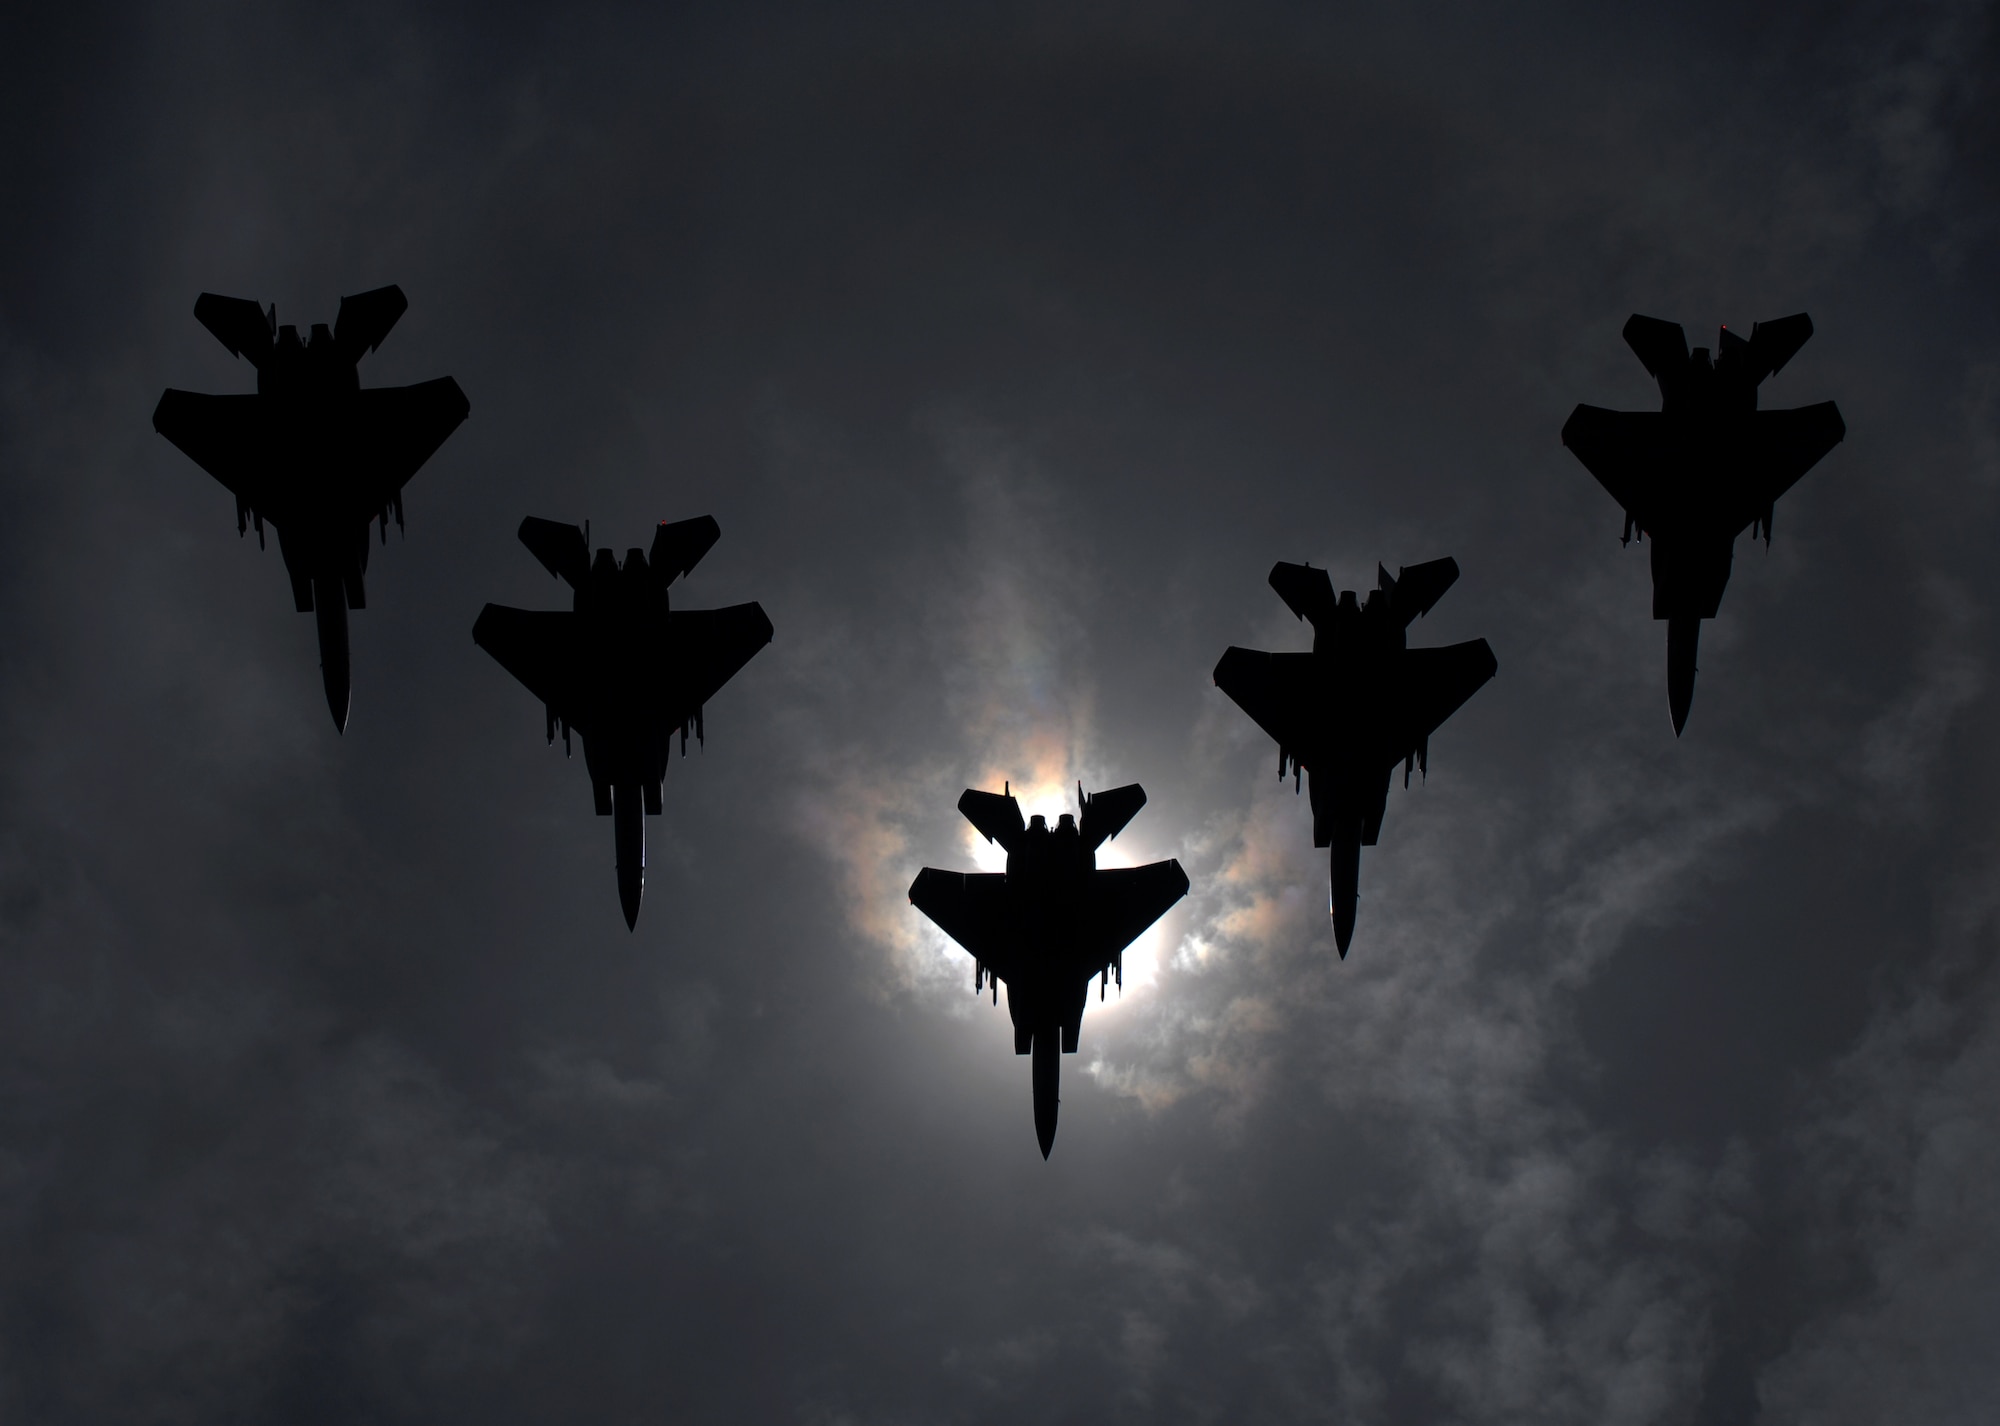 A flight of F-15C Eagles from the 44th Fighter Squadron, Kadena Air Base, flies during a total solar eclipse over the island of Okinawa, Japan July 22. The eclipse was a rare opportunity for service members stationed here to witness this unique event. (U.S. Air Force photo/Airman 1st Class Chad Warren)